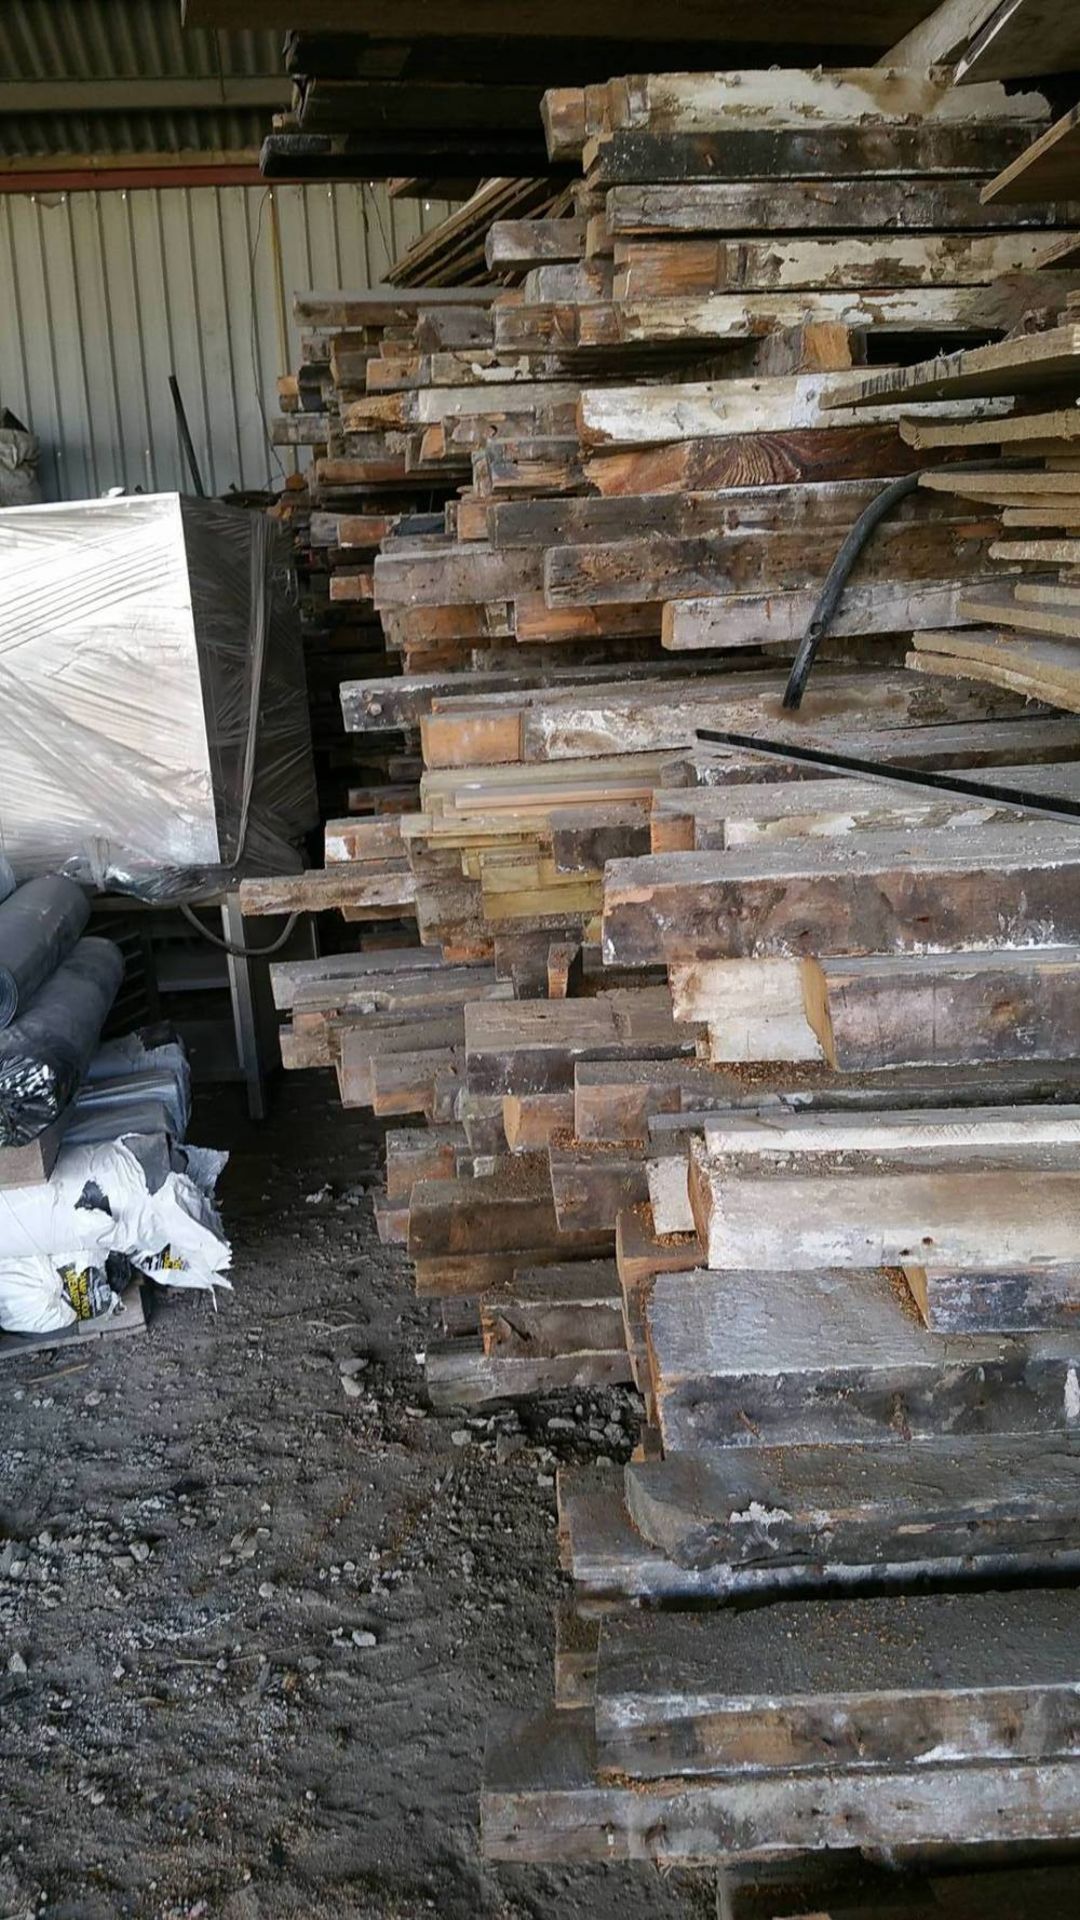 200 year old approx joist timbers taken from a warehouse in clink street, london. - Image 2 of 4